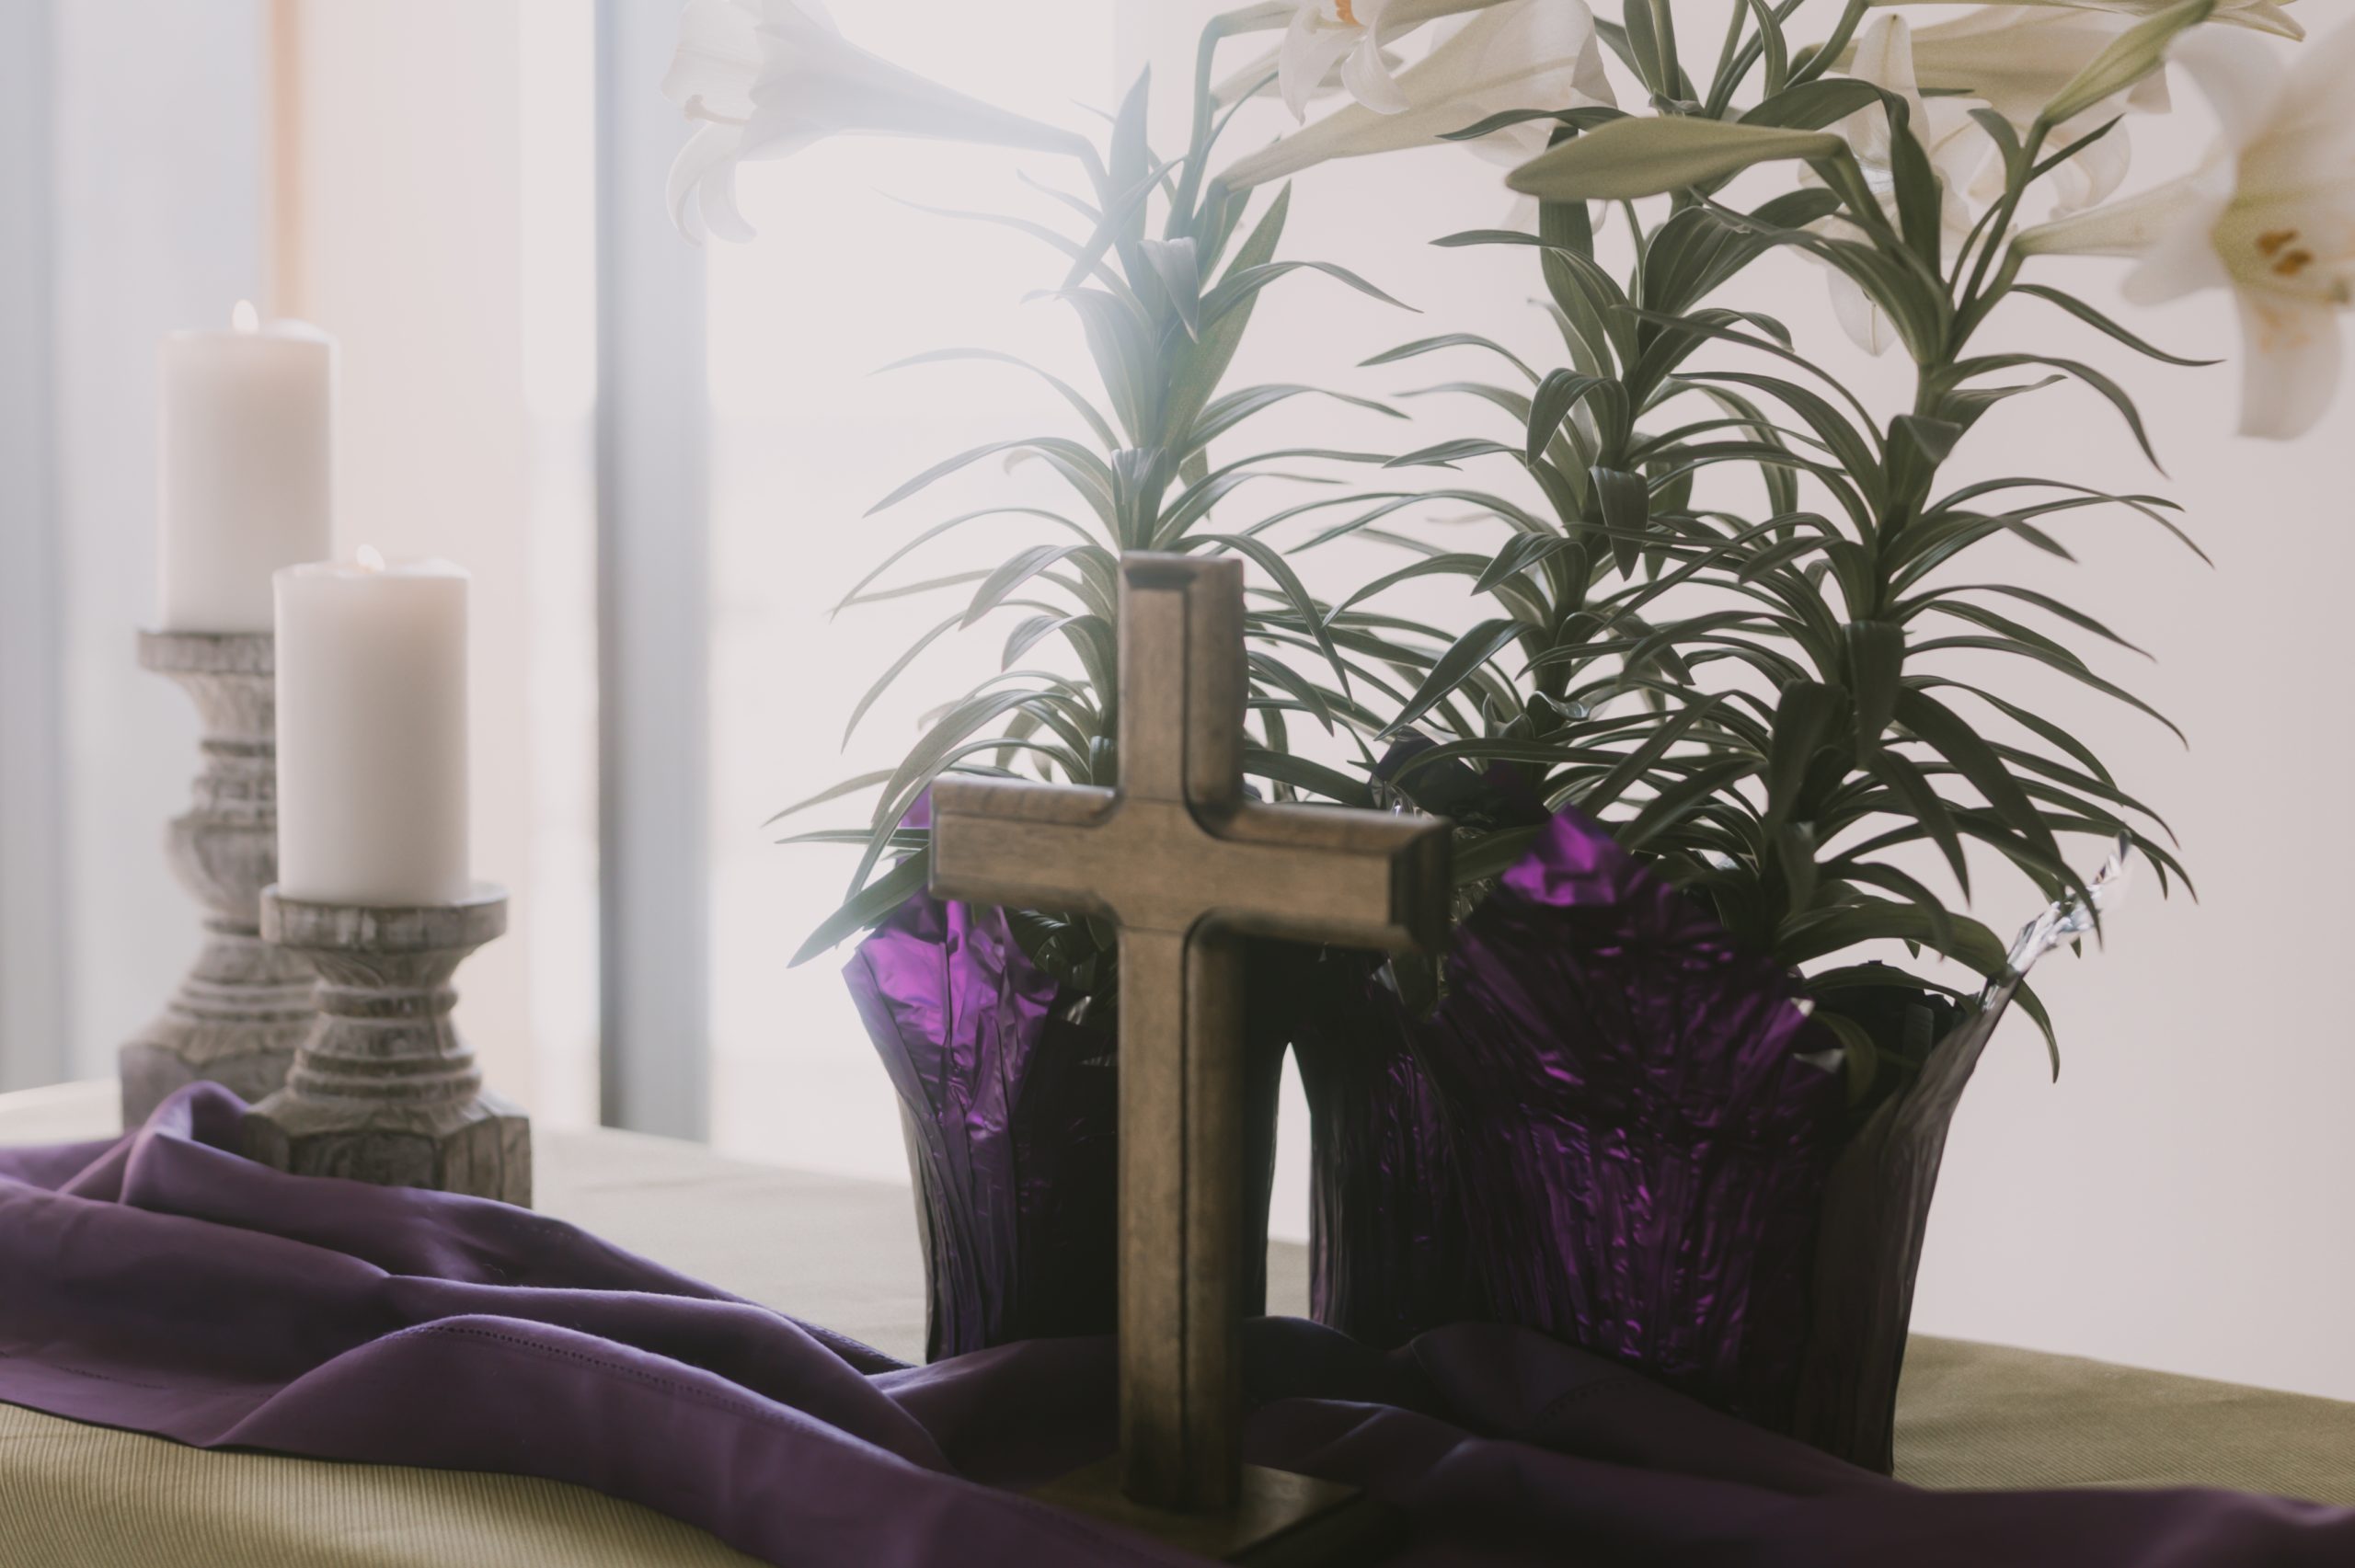 Image of altar in the worship center at Lutheran Church of Hope Grimes with cross, flowers, and candles